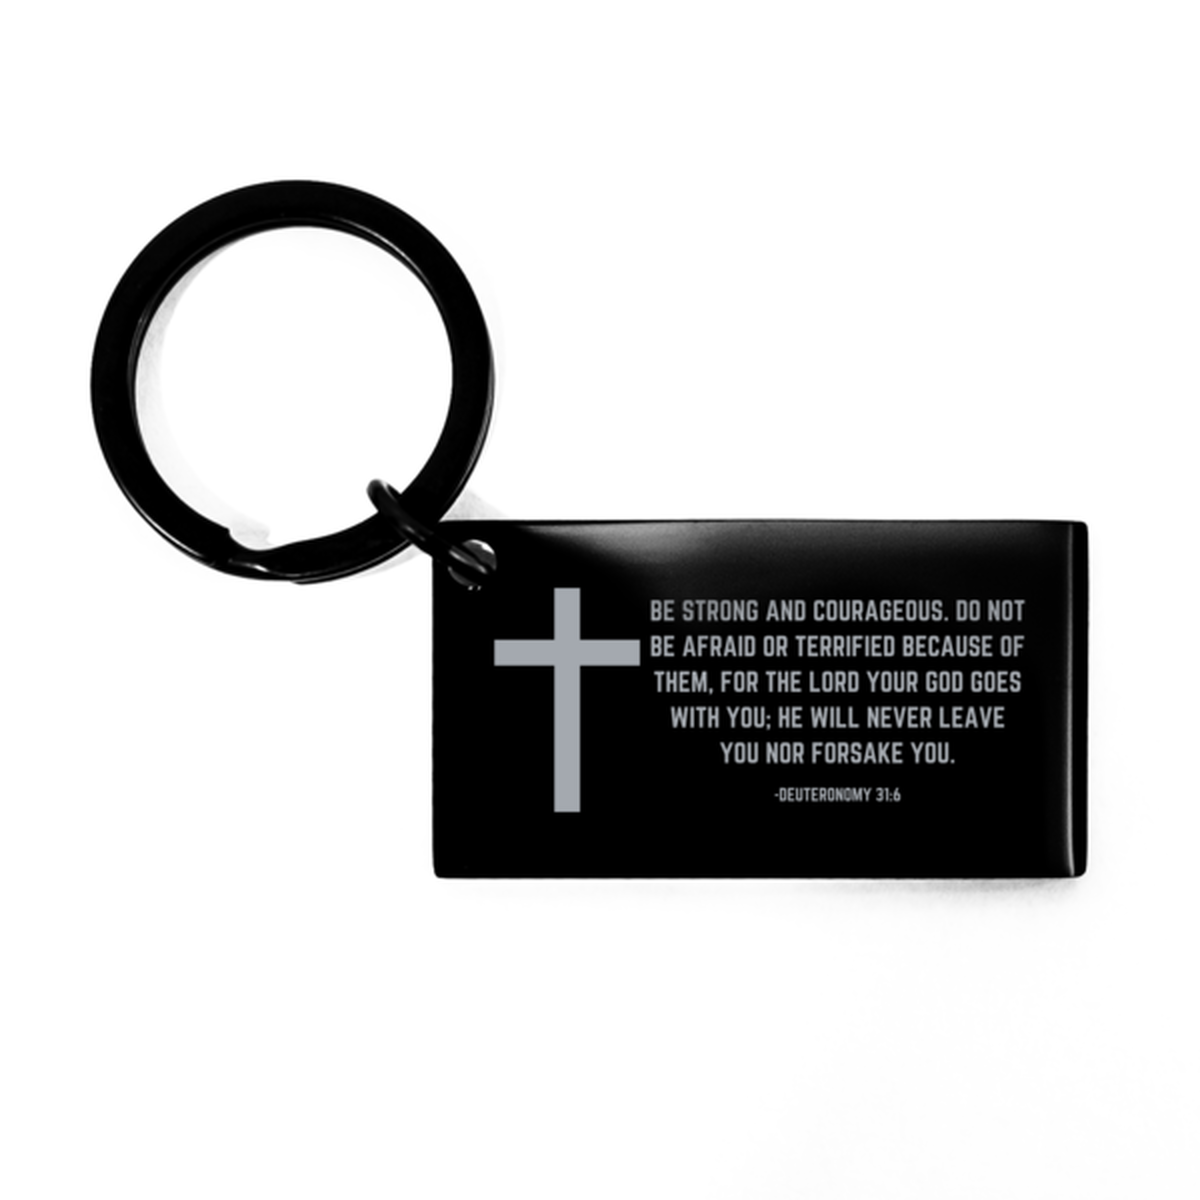 Baptism Gifts For Teenage Boys Girls, Christian Bible Verse Black Keychain, He will never leave you nor forsake you, Confirmation Gifts, Bible Verse Keyring for Son, Godson, Grandson, Nephew